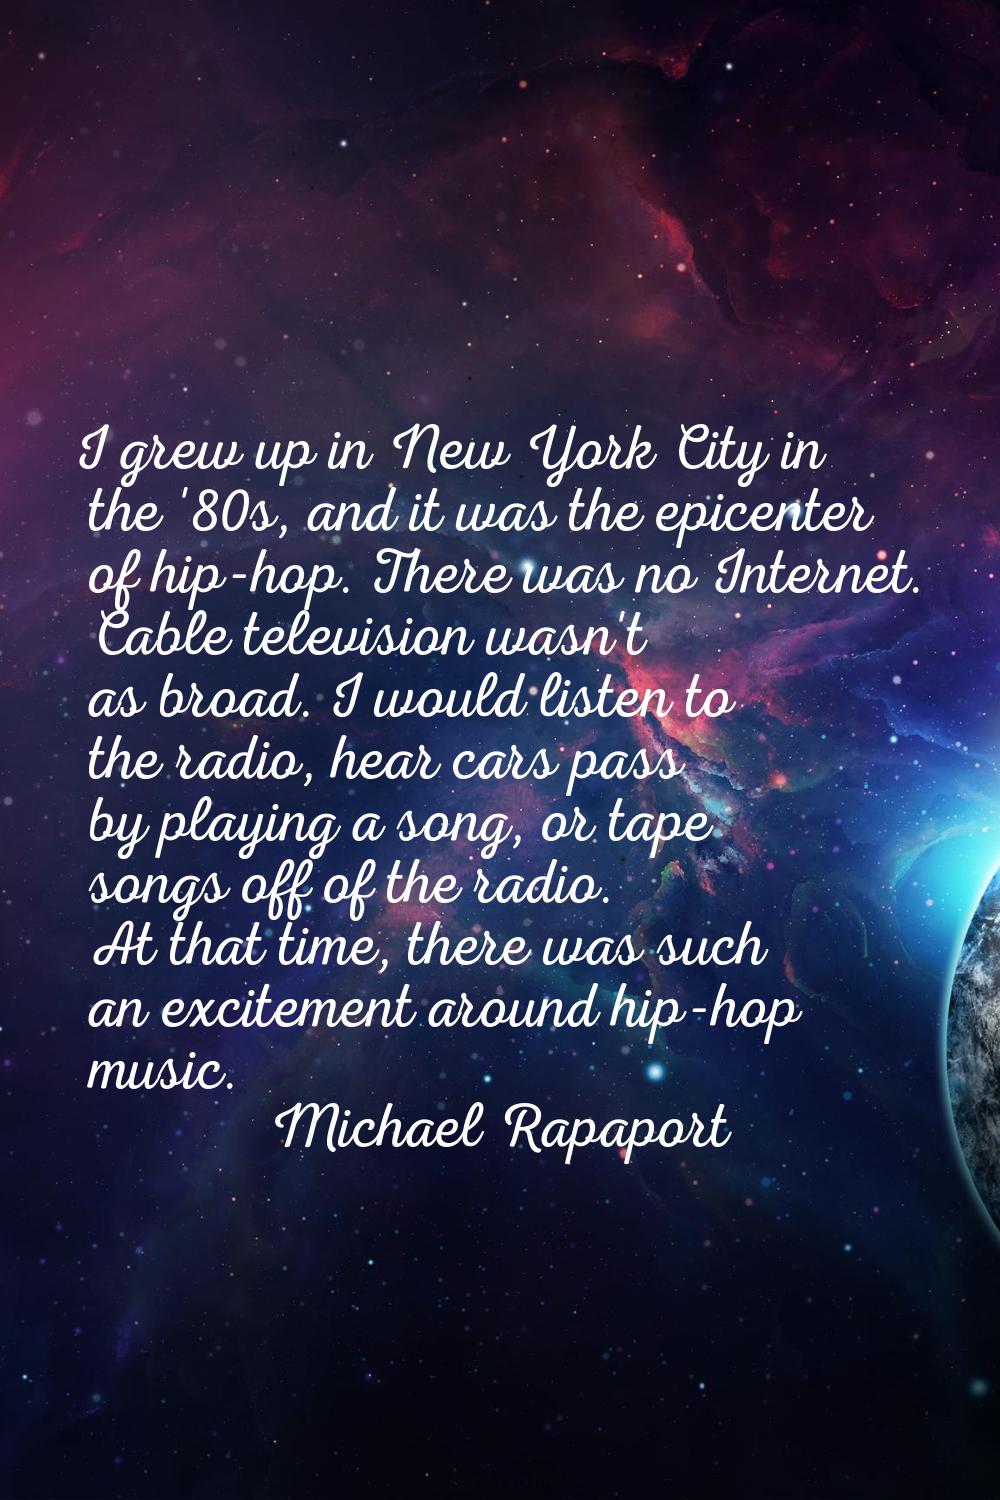 I grew up in New York City in the '80s, and it was the epicenter of hip-hop. There was no Internet.